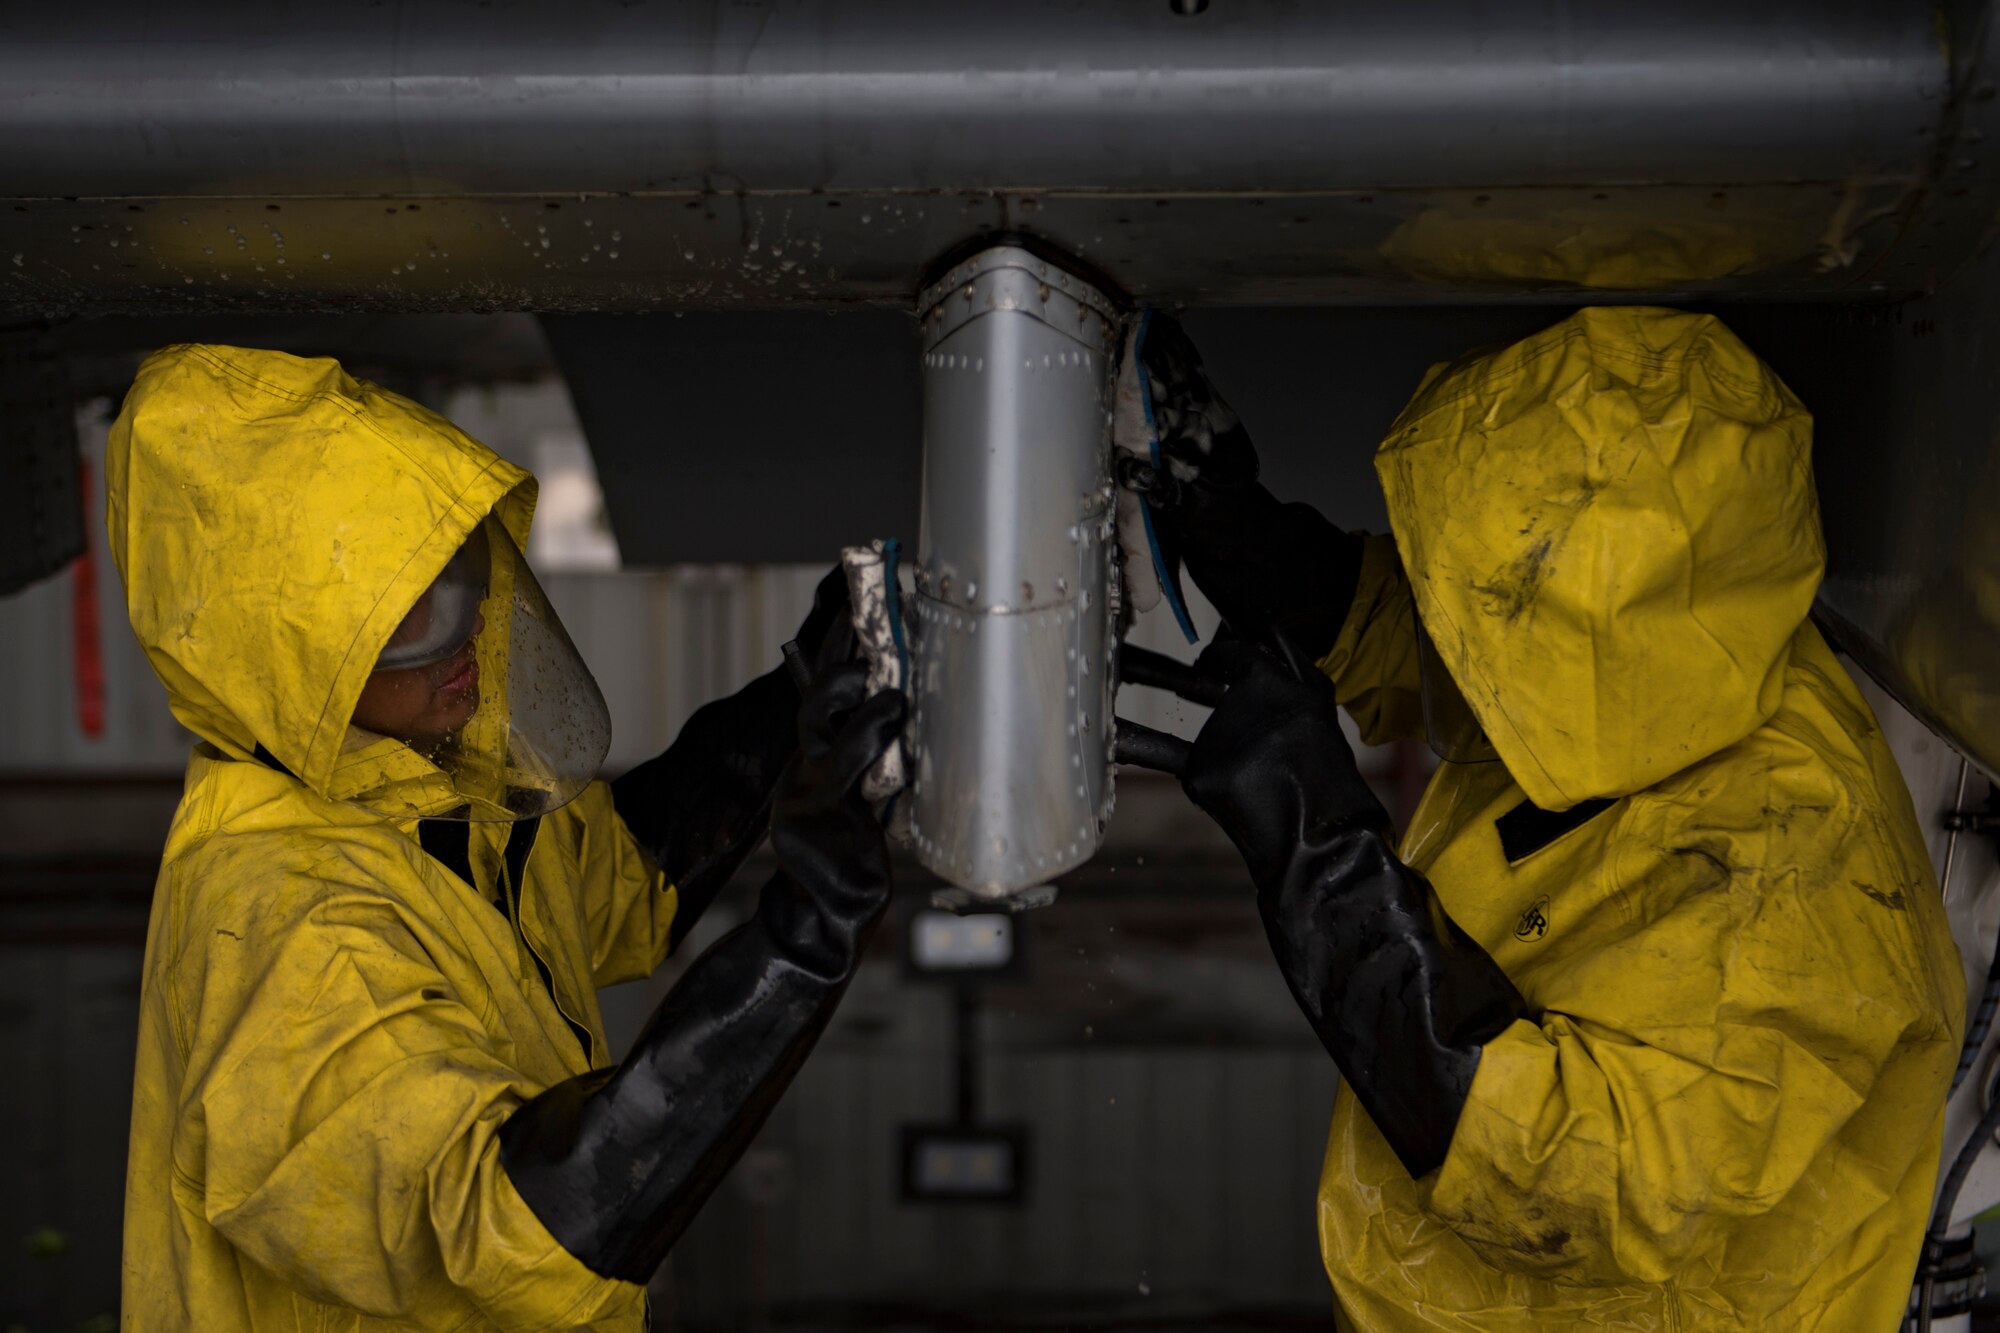 Members of the 23d Aircraft Maintenance Squadron clean under a wing of an A-10C Thunderbolt II, Aug. 28, 2017, at Moody Air Force Base, Ga. Maintenance procedures require that A-10s are washed at least every 180 days to prevent maintenance issues and safety hazards to the pilot. Since strong chemicals are used to clean the aircraft Airmen must wear personal protective equipment. (U.S. Air Force photo by Airman 1st Class Daniel Snider)